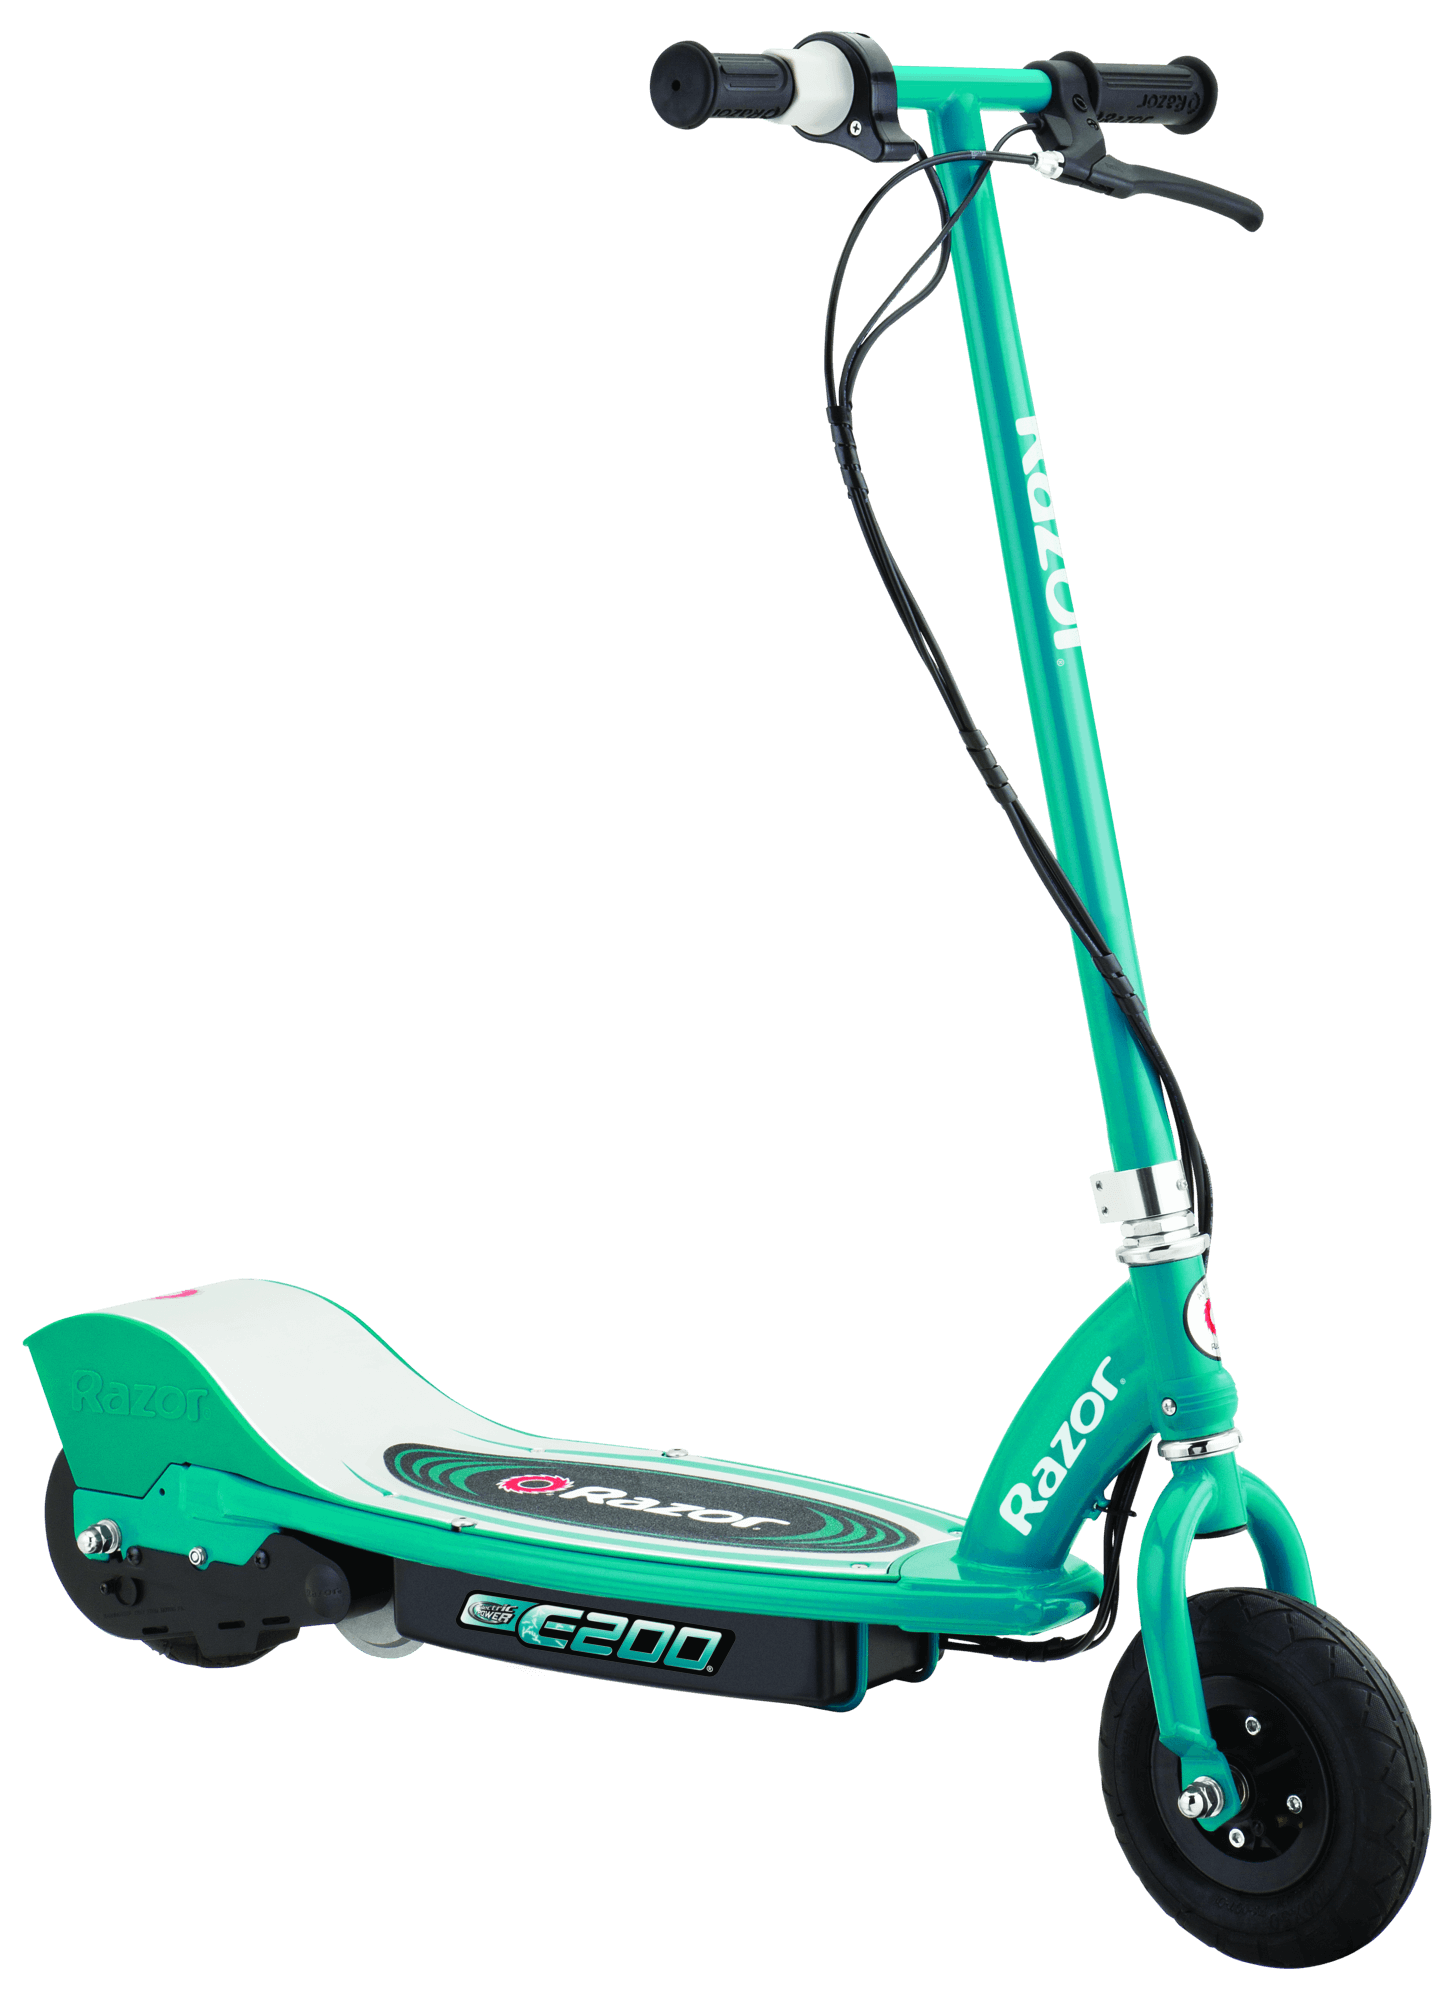 Green colored electric scooter for teenagers.